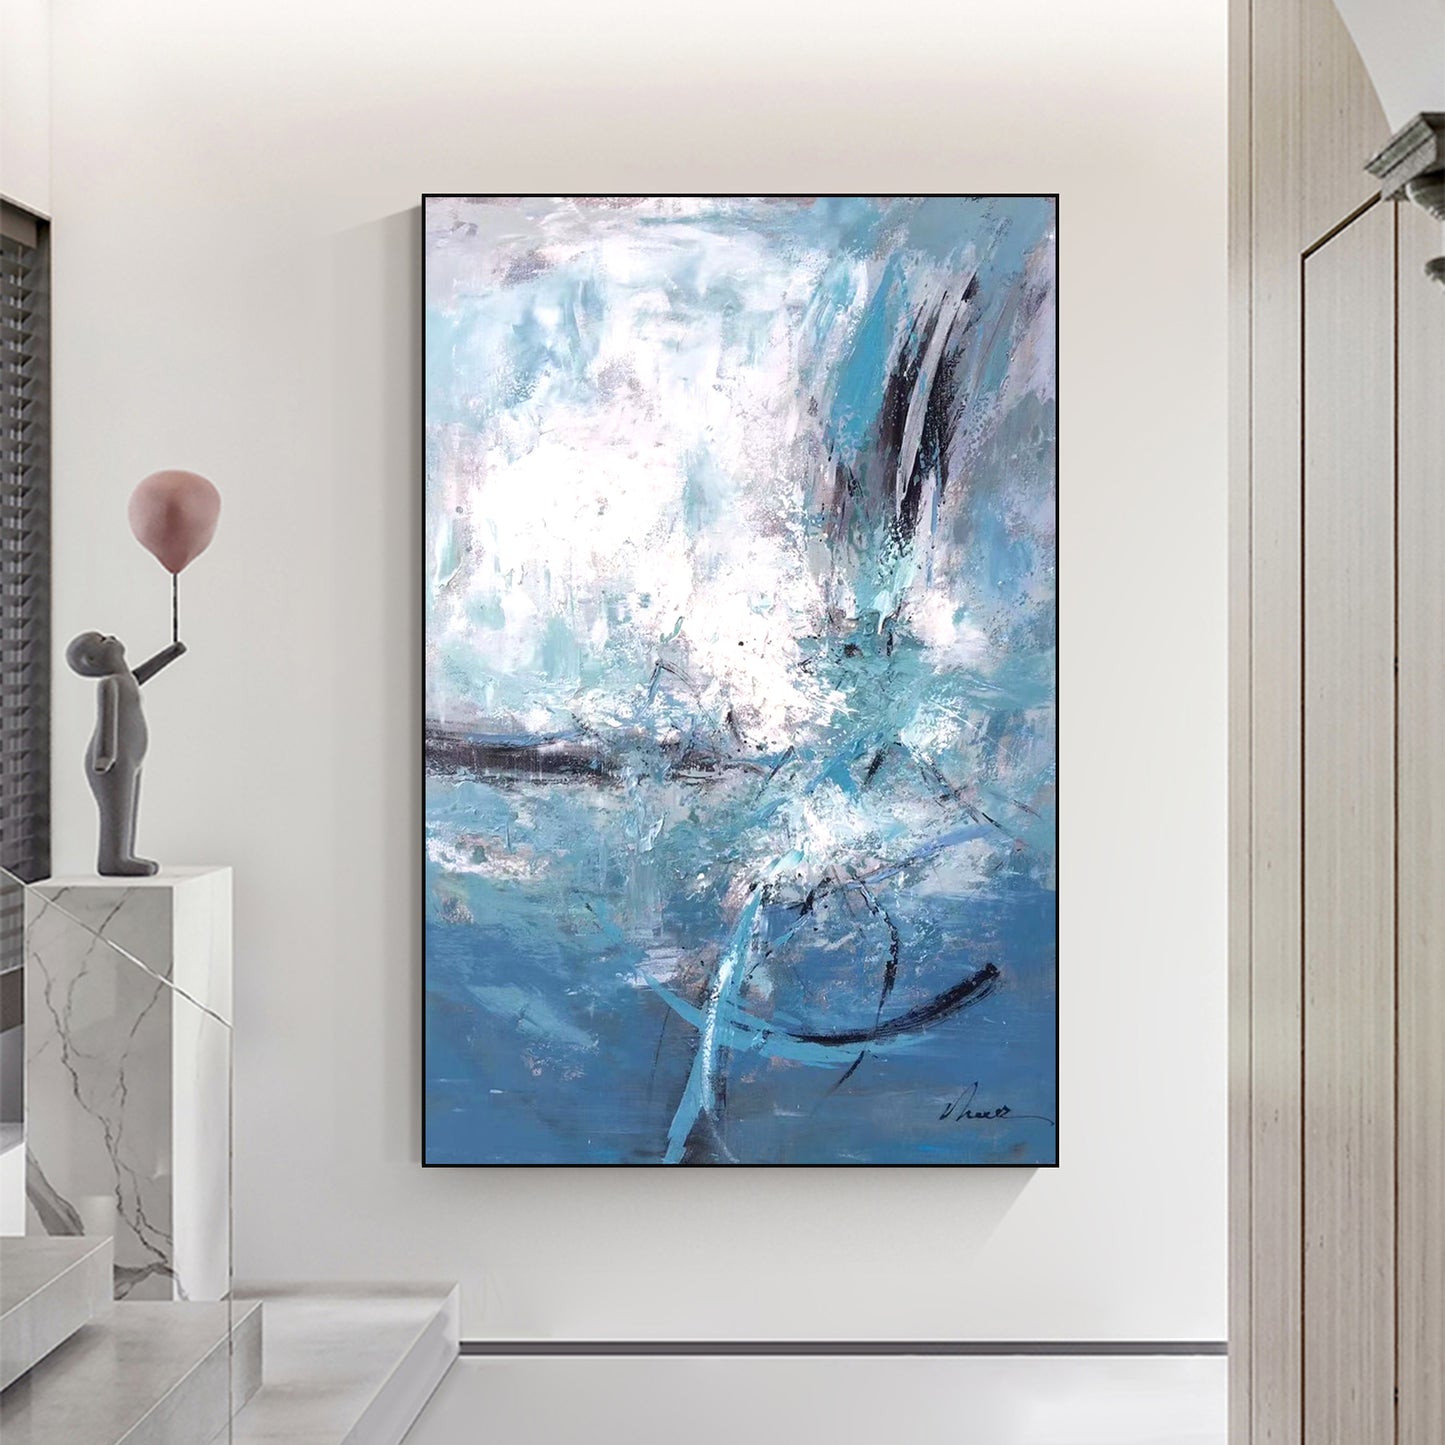 ABSTRACT PAINTING, BLUE PLANET, HAND-PAINTED CANVAS